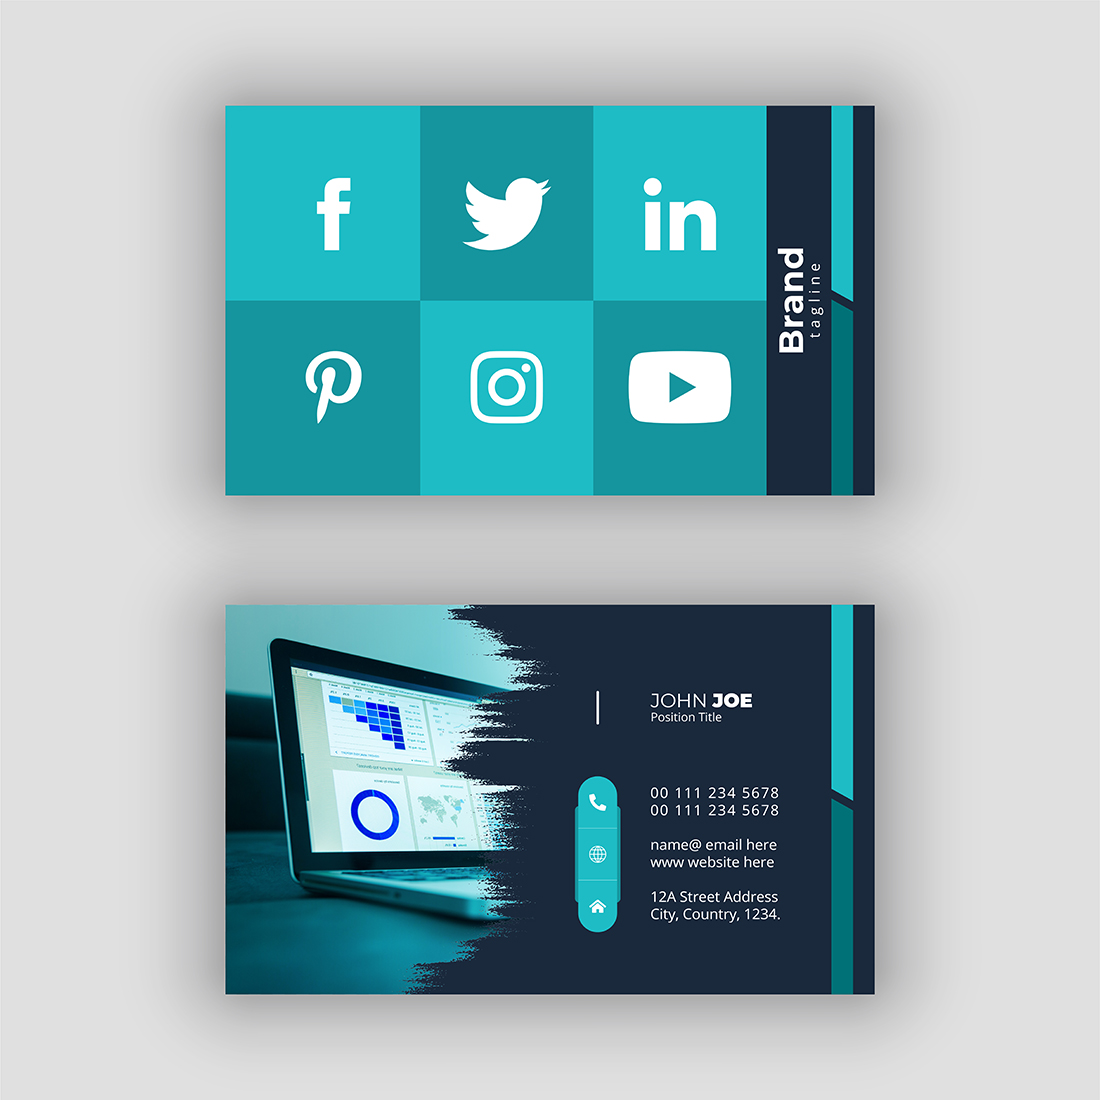 Social Media Business Card preview image.